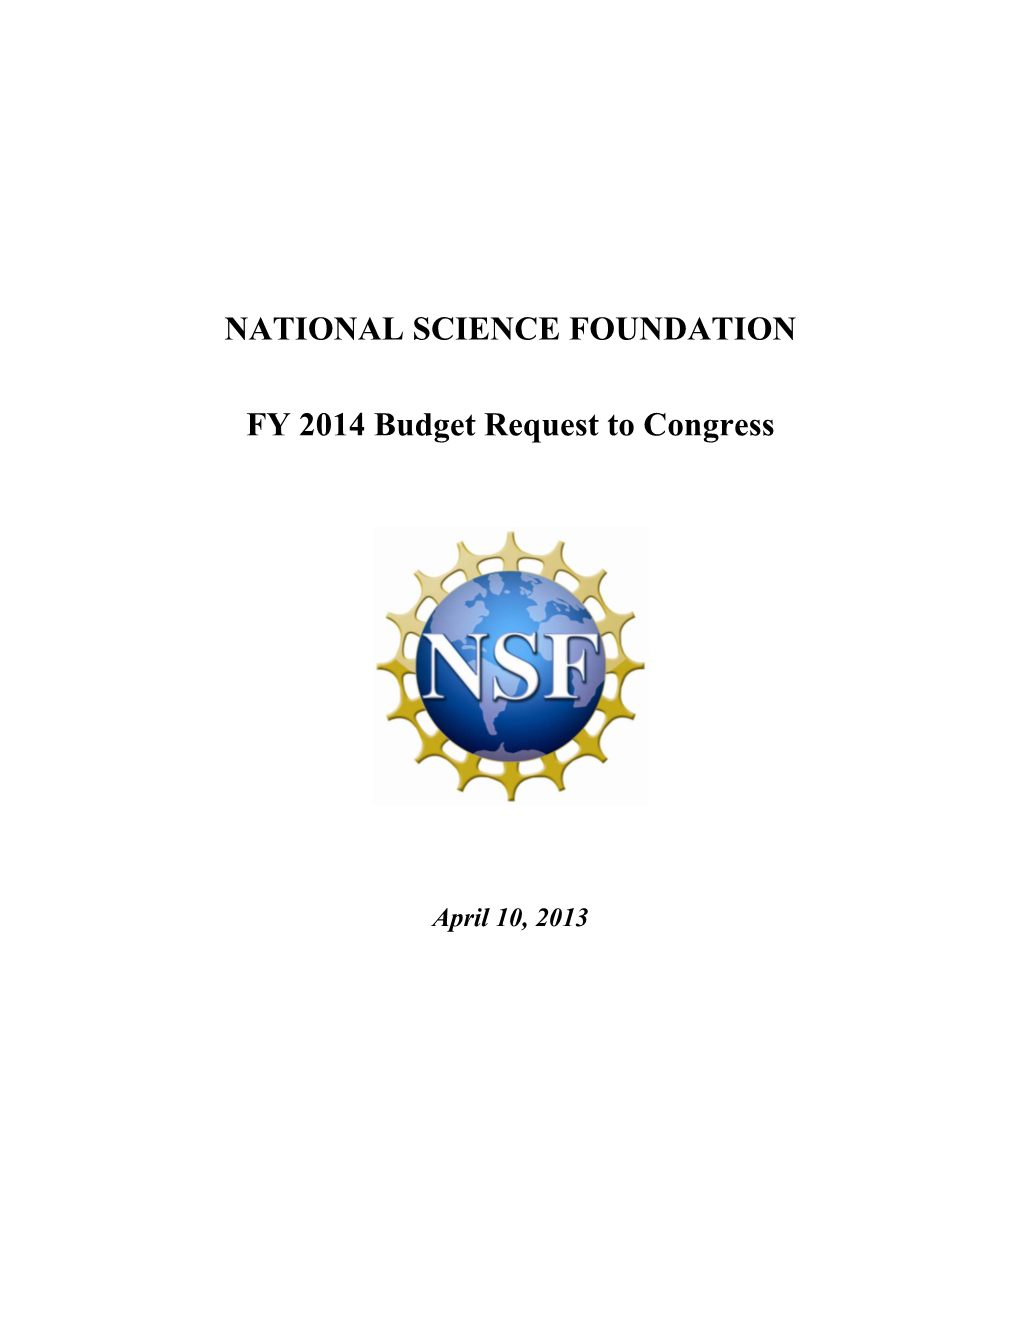 NATIONAL SCIENCE FOUNDATION FY 2014 Budget Request to Congress